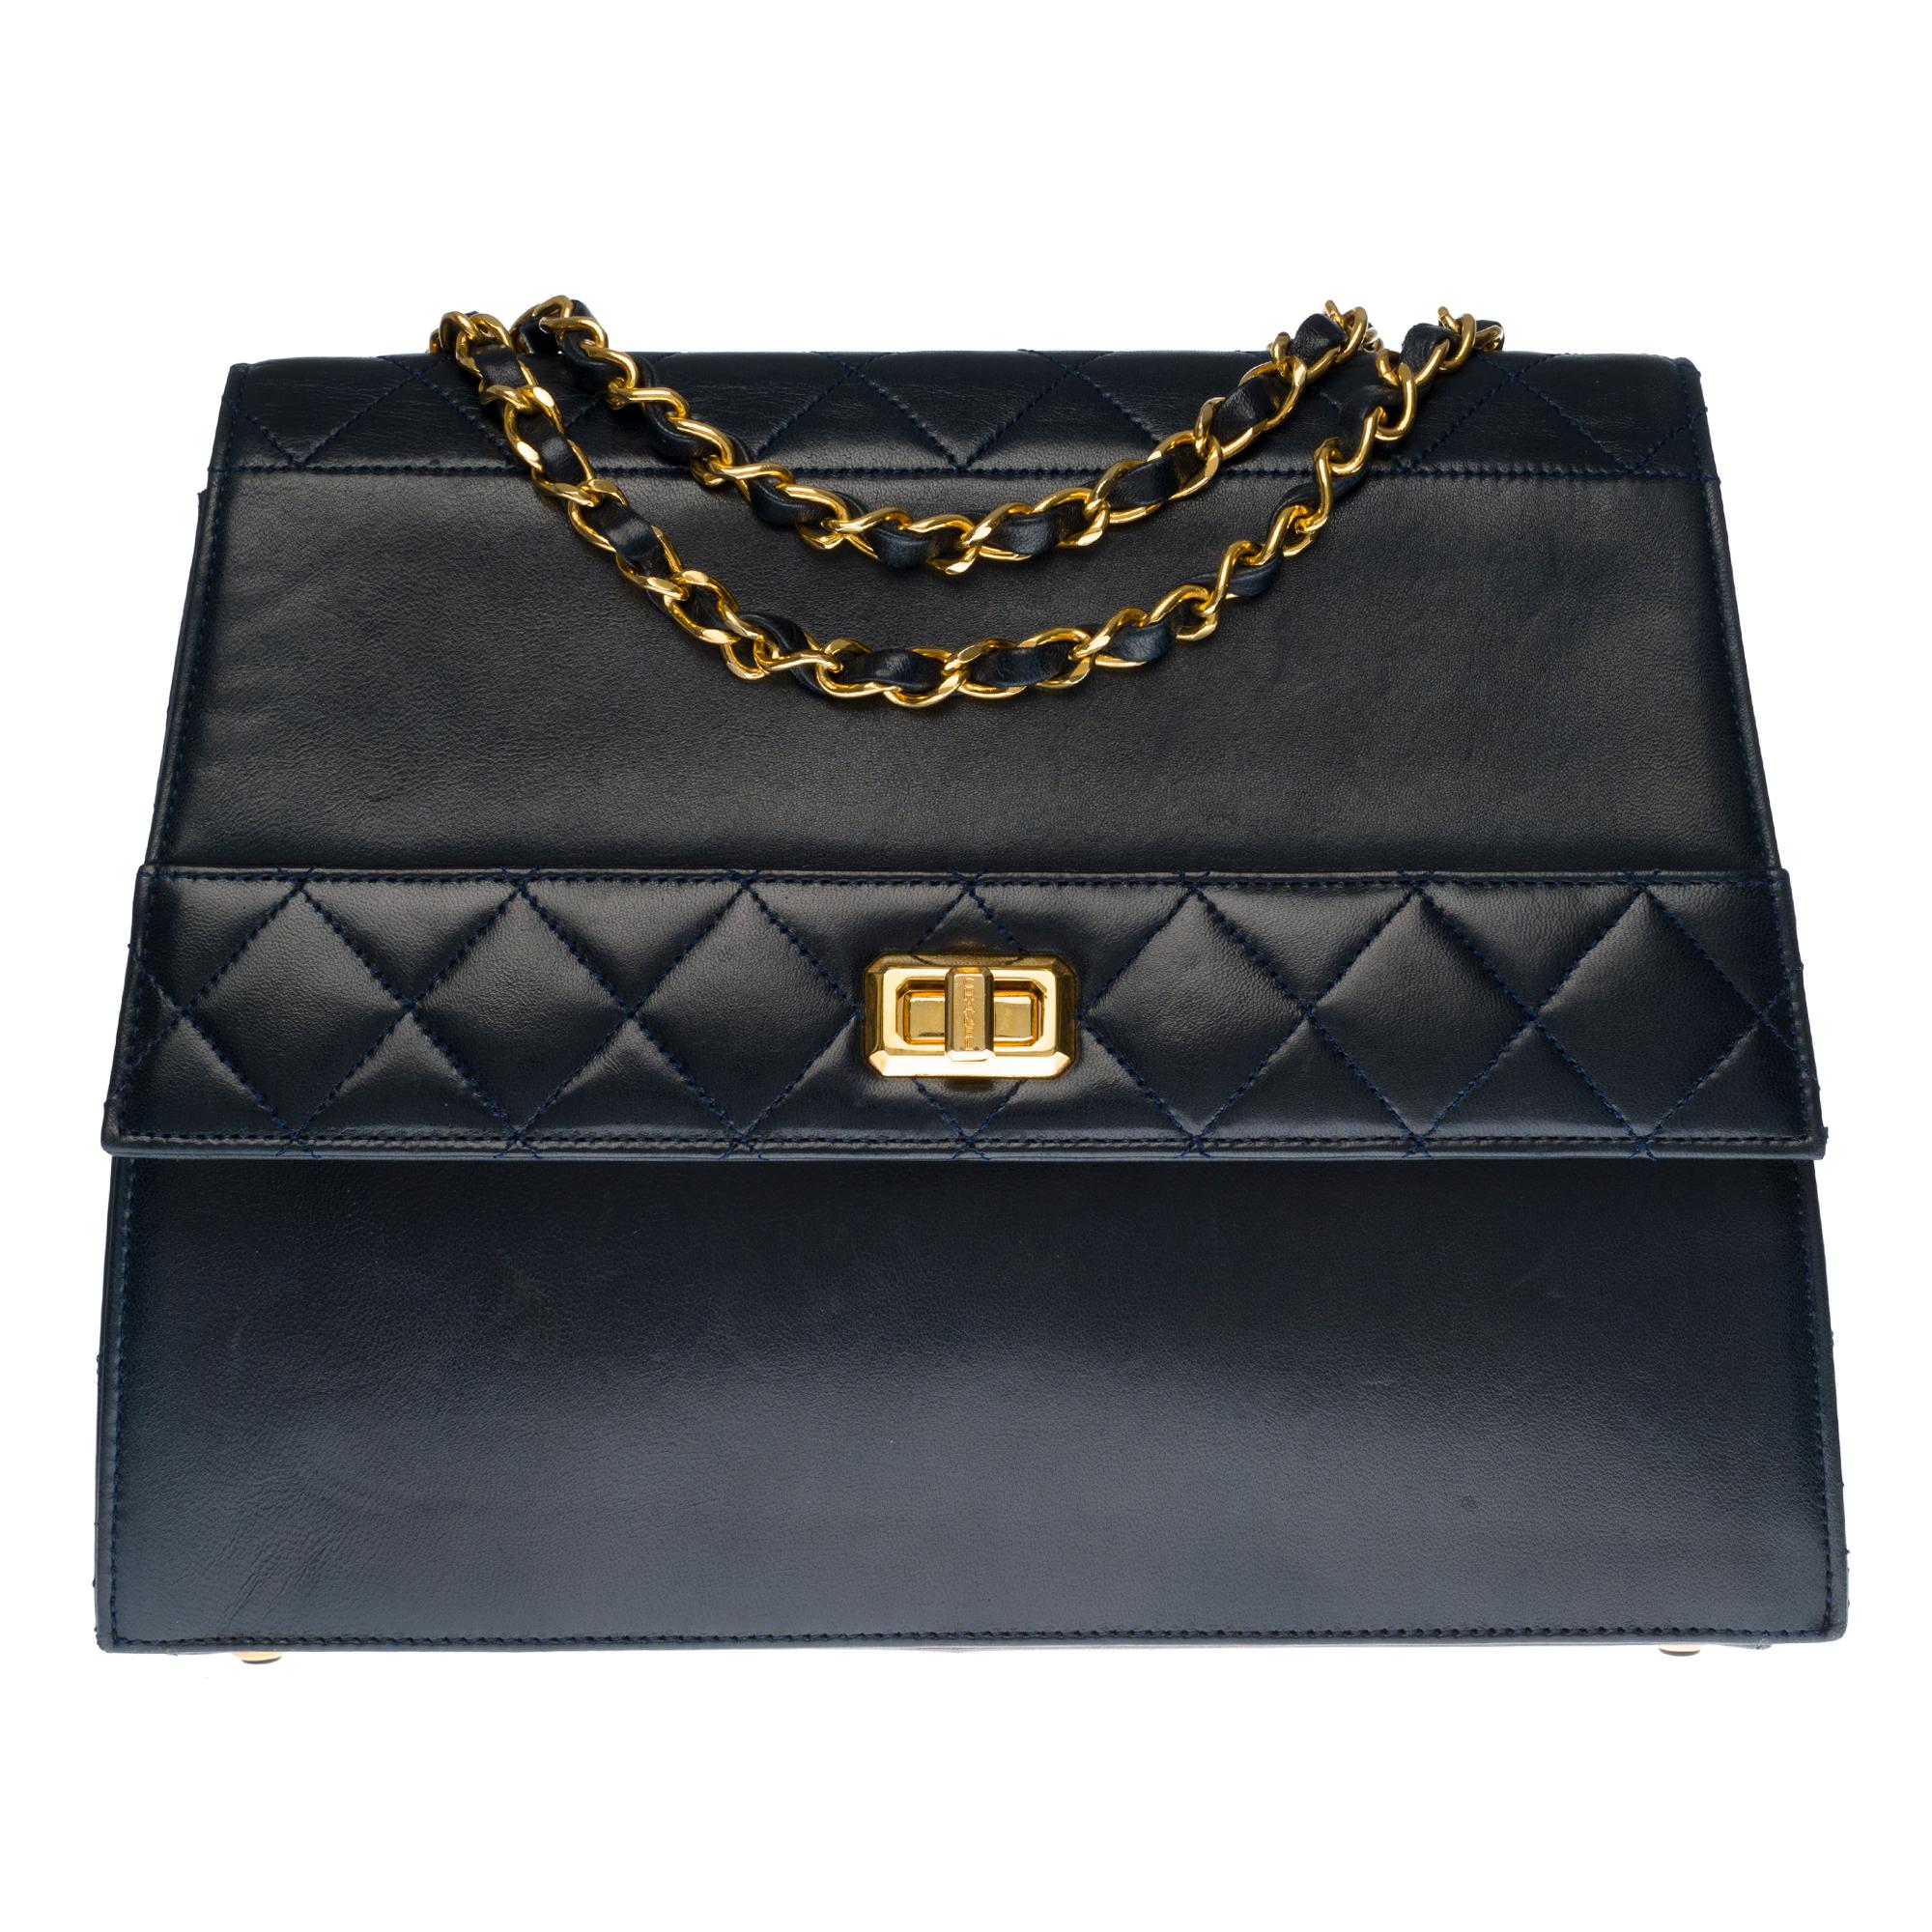  CHANEL
Trapeze navy blue Leather Shoulder bag 
Very rare bag. 
Date: 1989/1991.
Made in France 
with logo detail lock 
with its hologram inside.
One slip pocket inside, big compartment. 
Chain length: 45 cm. 

Reference:  121278587.

with its